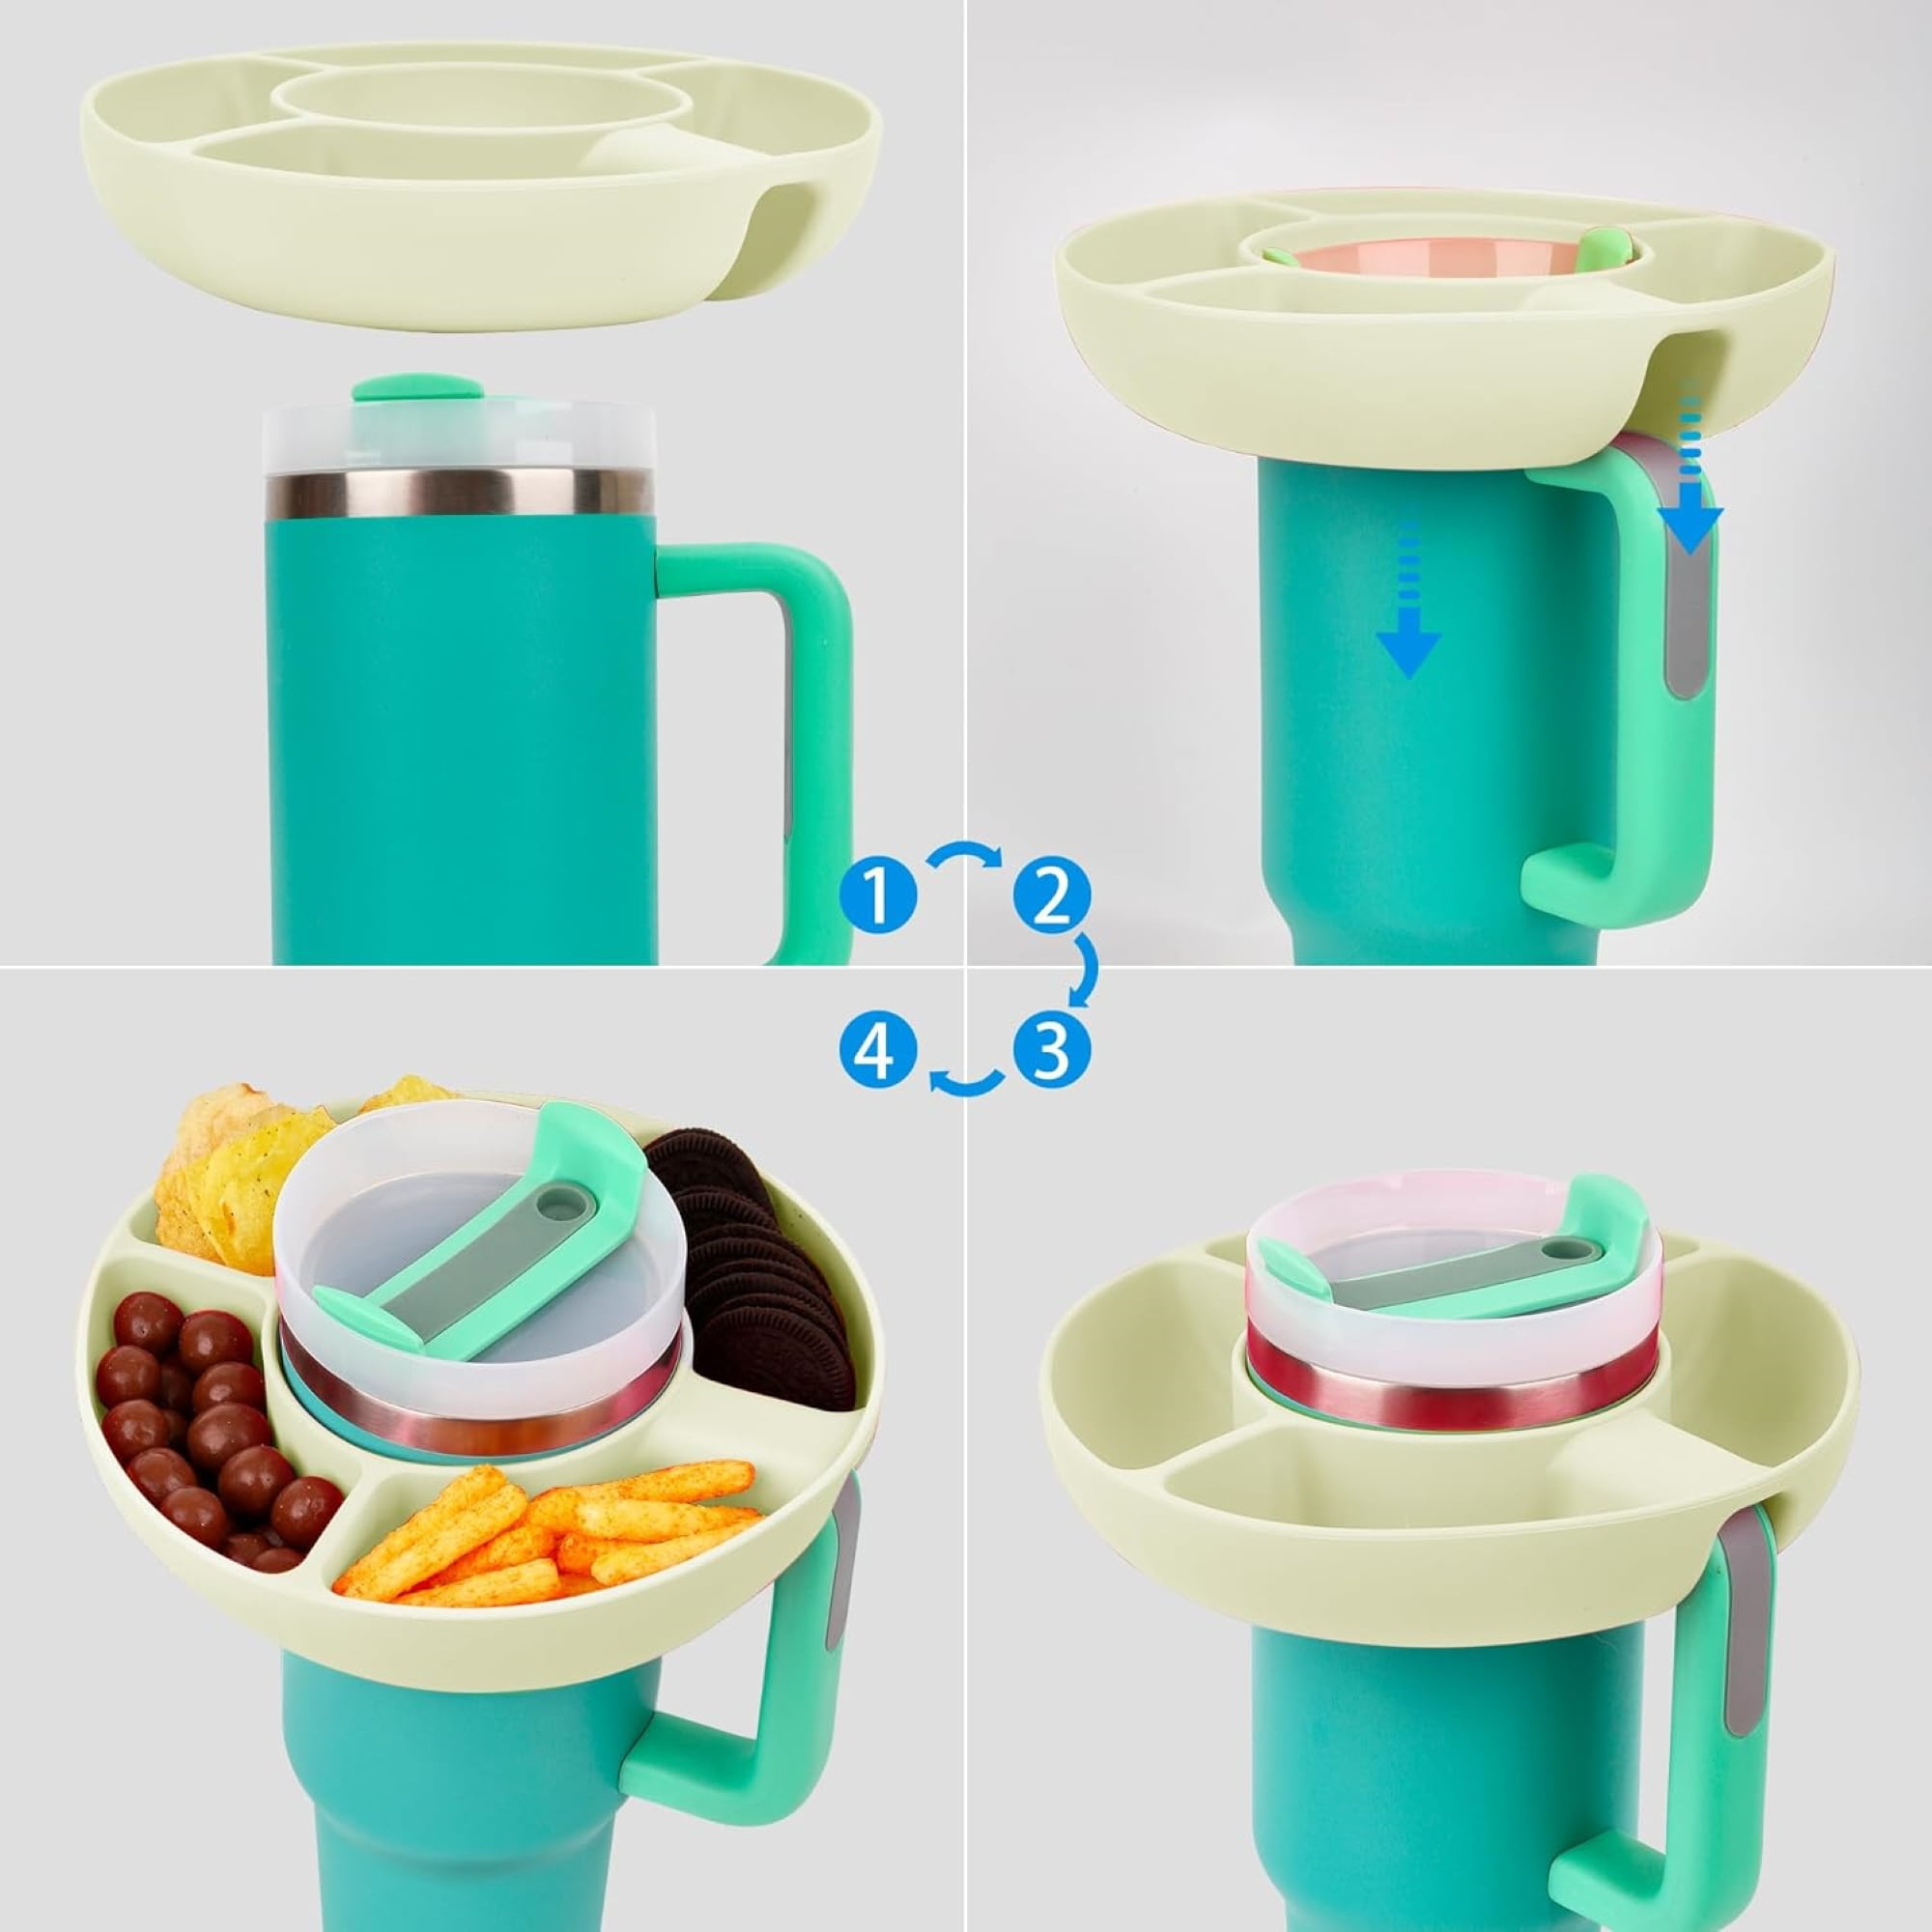  Hovive Snack Bowl for 40oz Cup Reusable Stanley Cup